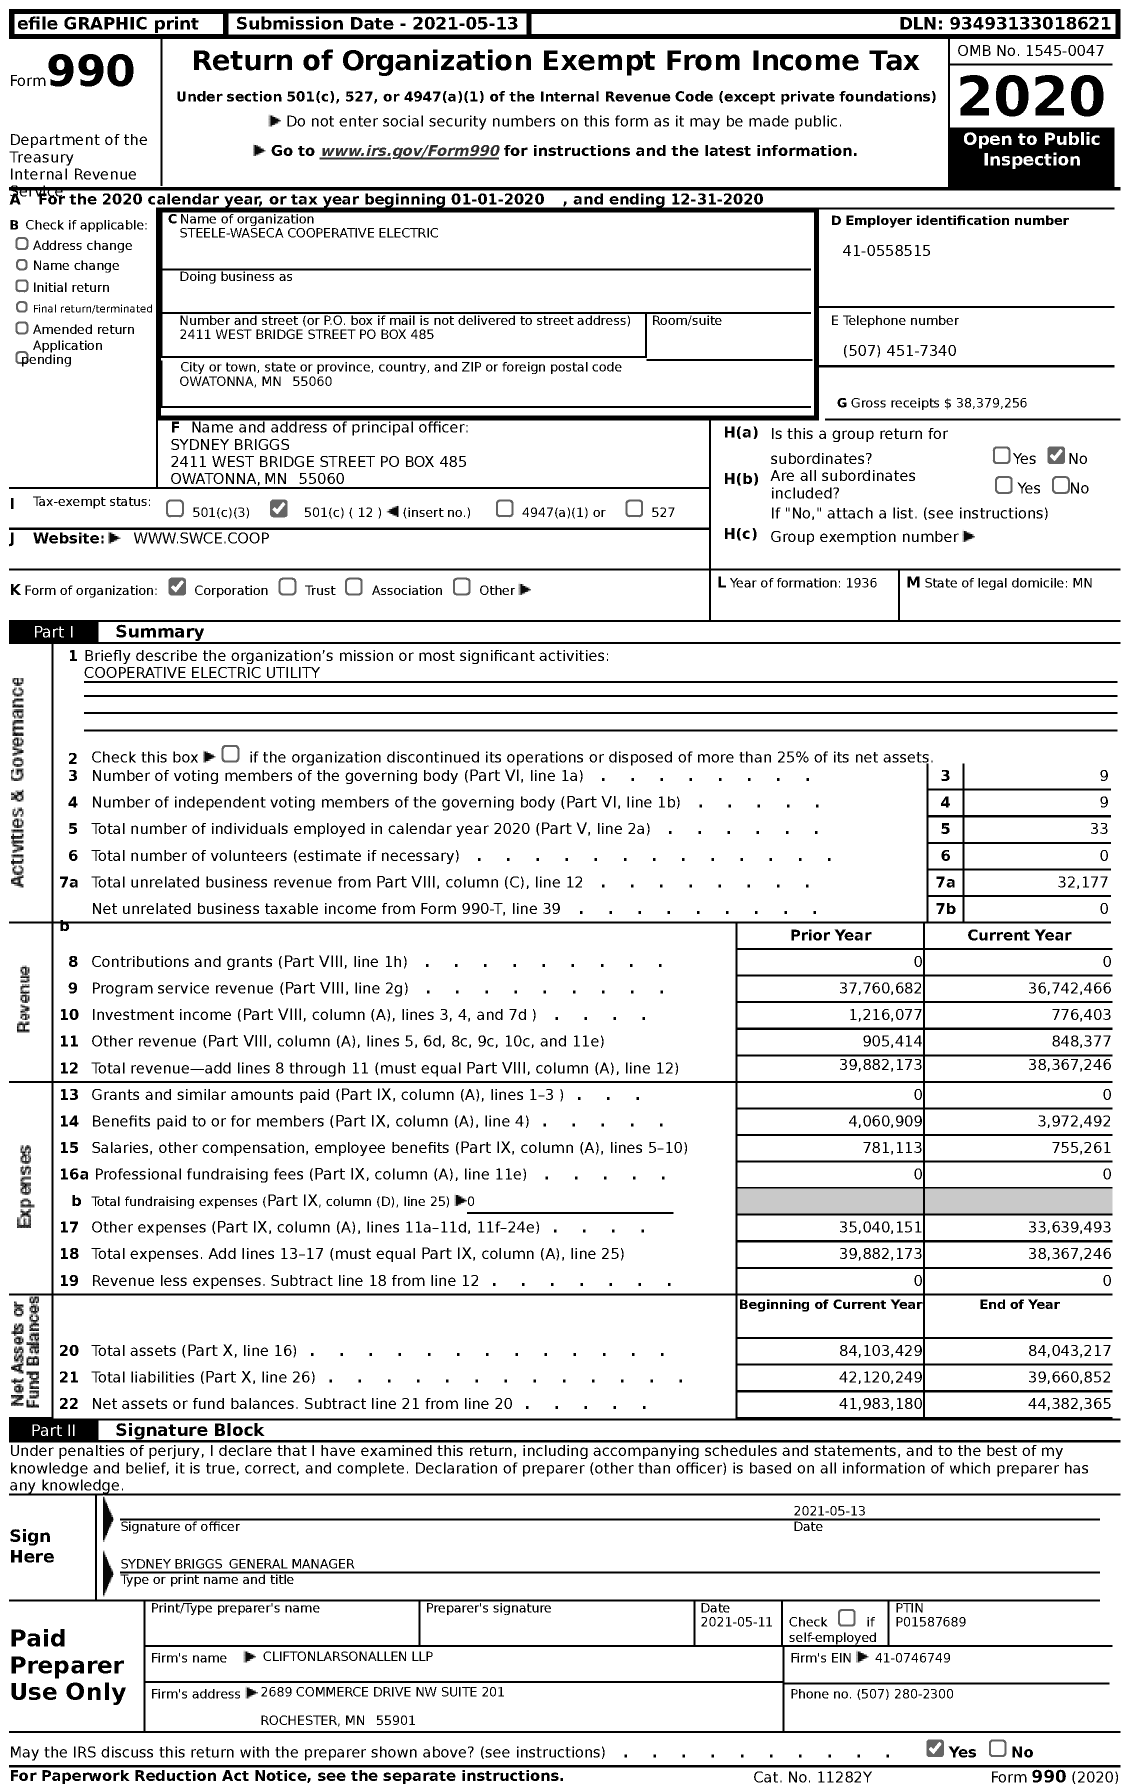 Image of first page of 2020 Form 990 for Steele-Waseca Cooperative Electric